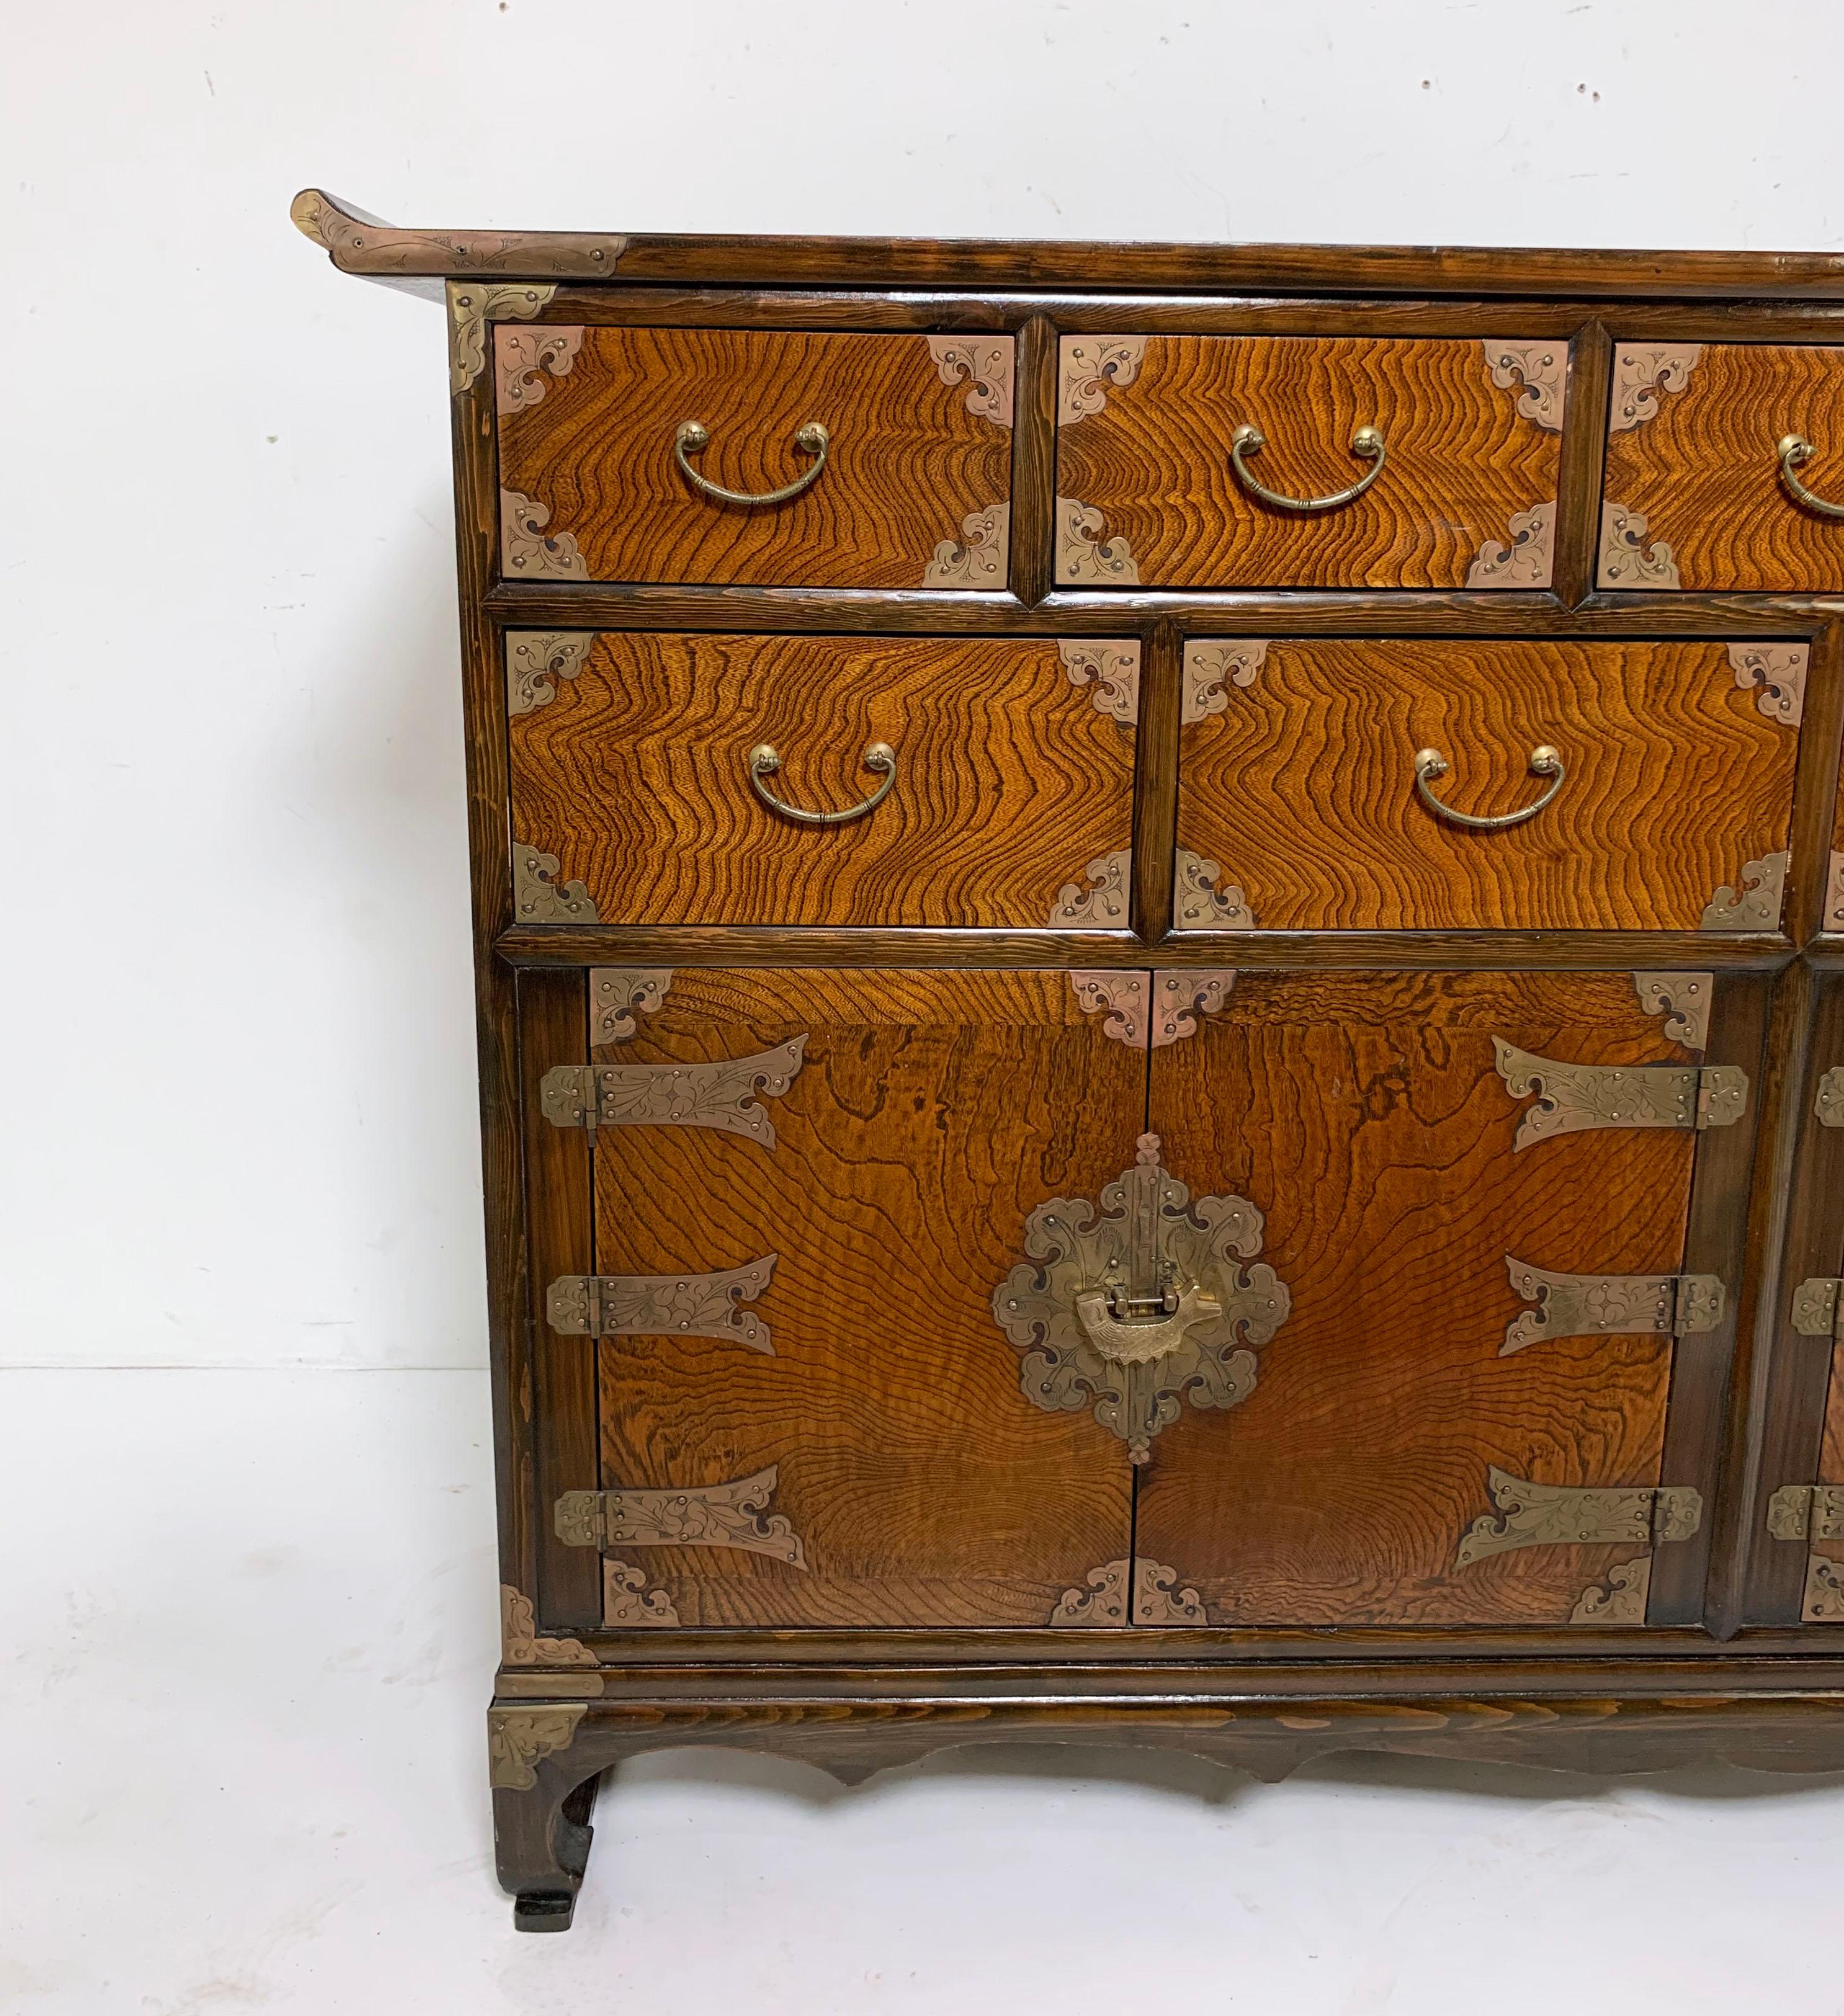 An elegant Korean tansu in elm and persimmon wood with chased brass hardware, consisting of nine drawers and two compartments below. This 59.25” wide chest is a fairly rare form not often seen in Korean cabinetry. Its broad configuration makes it